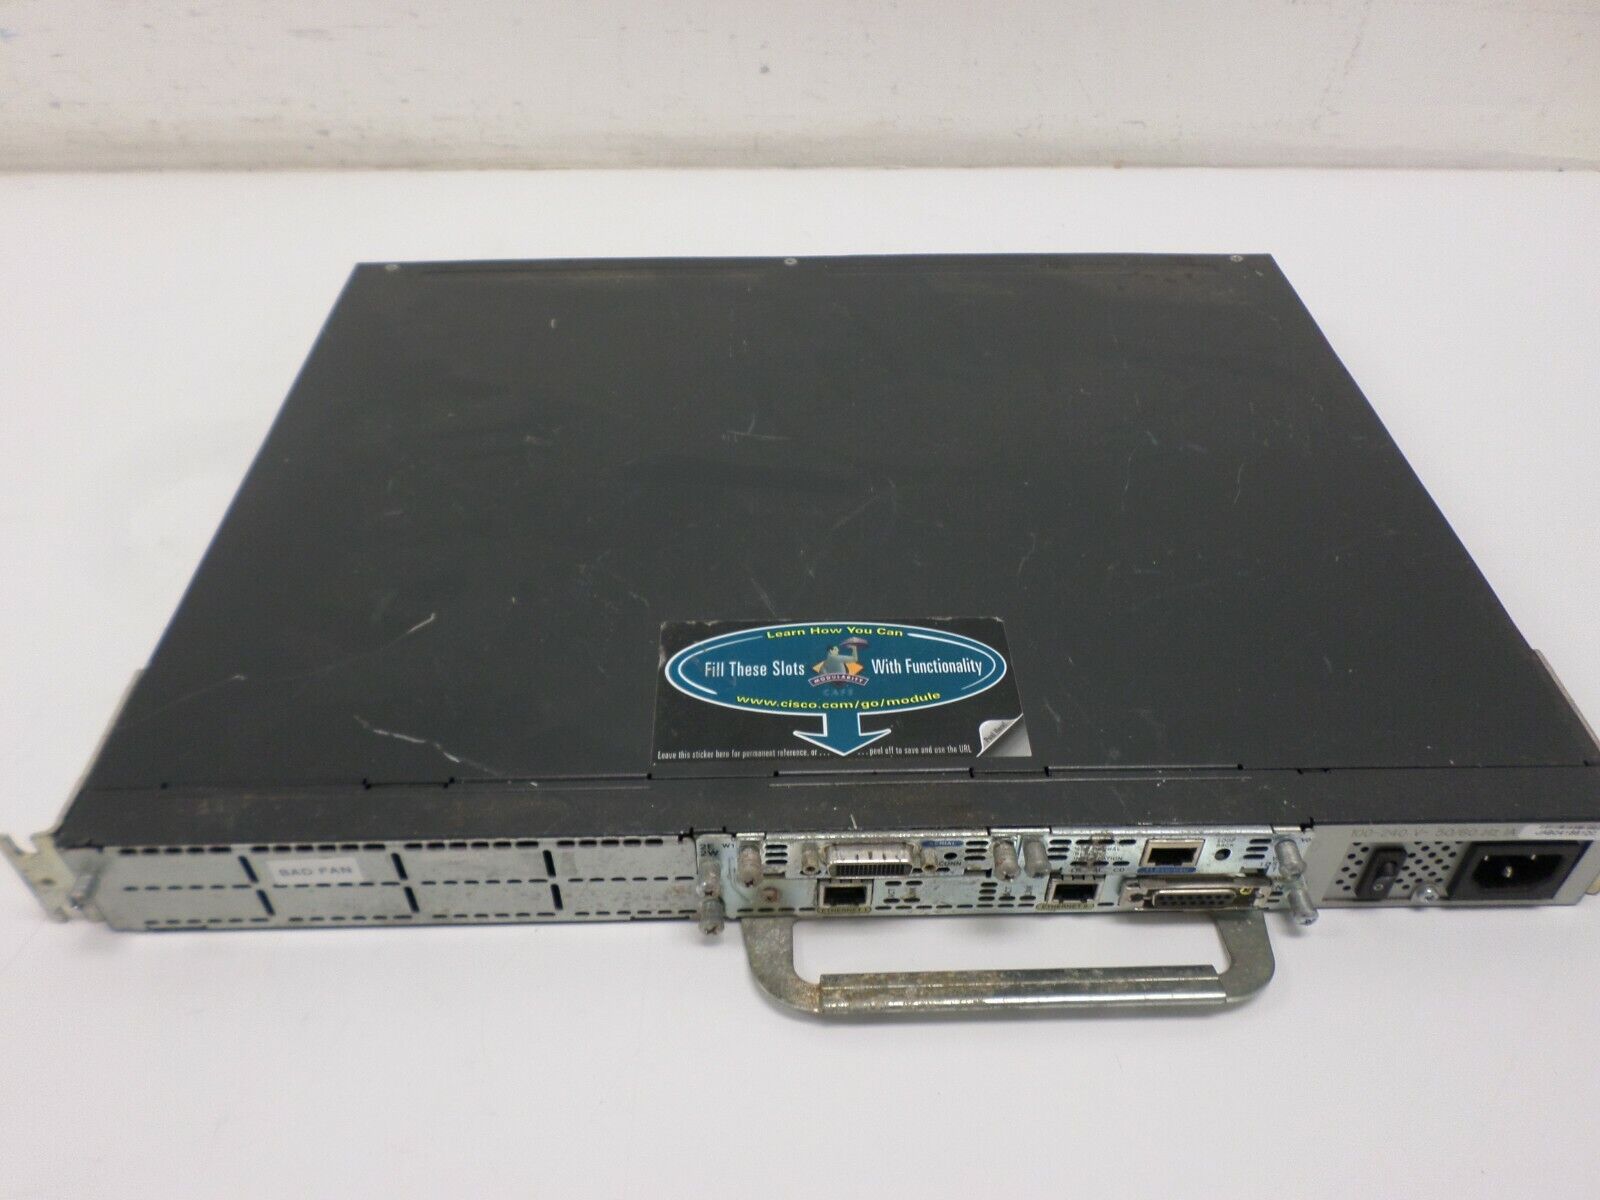 Cisco 3620 Series Router With One Module (Missing Faceplate)